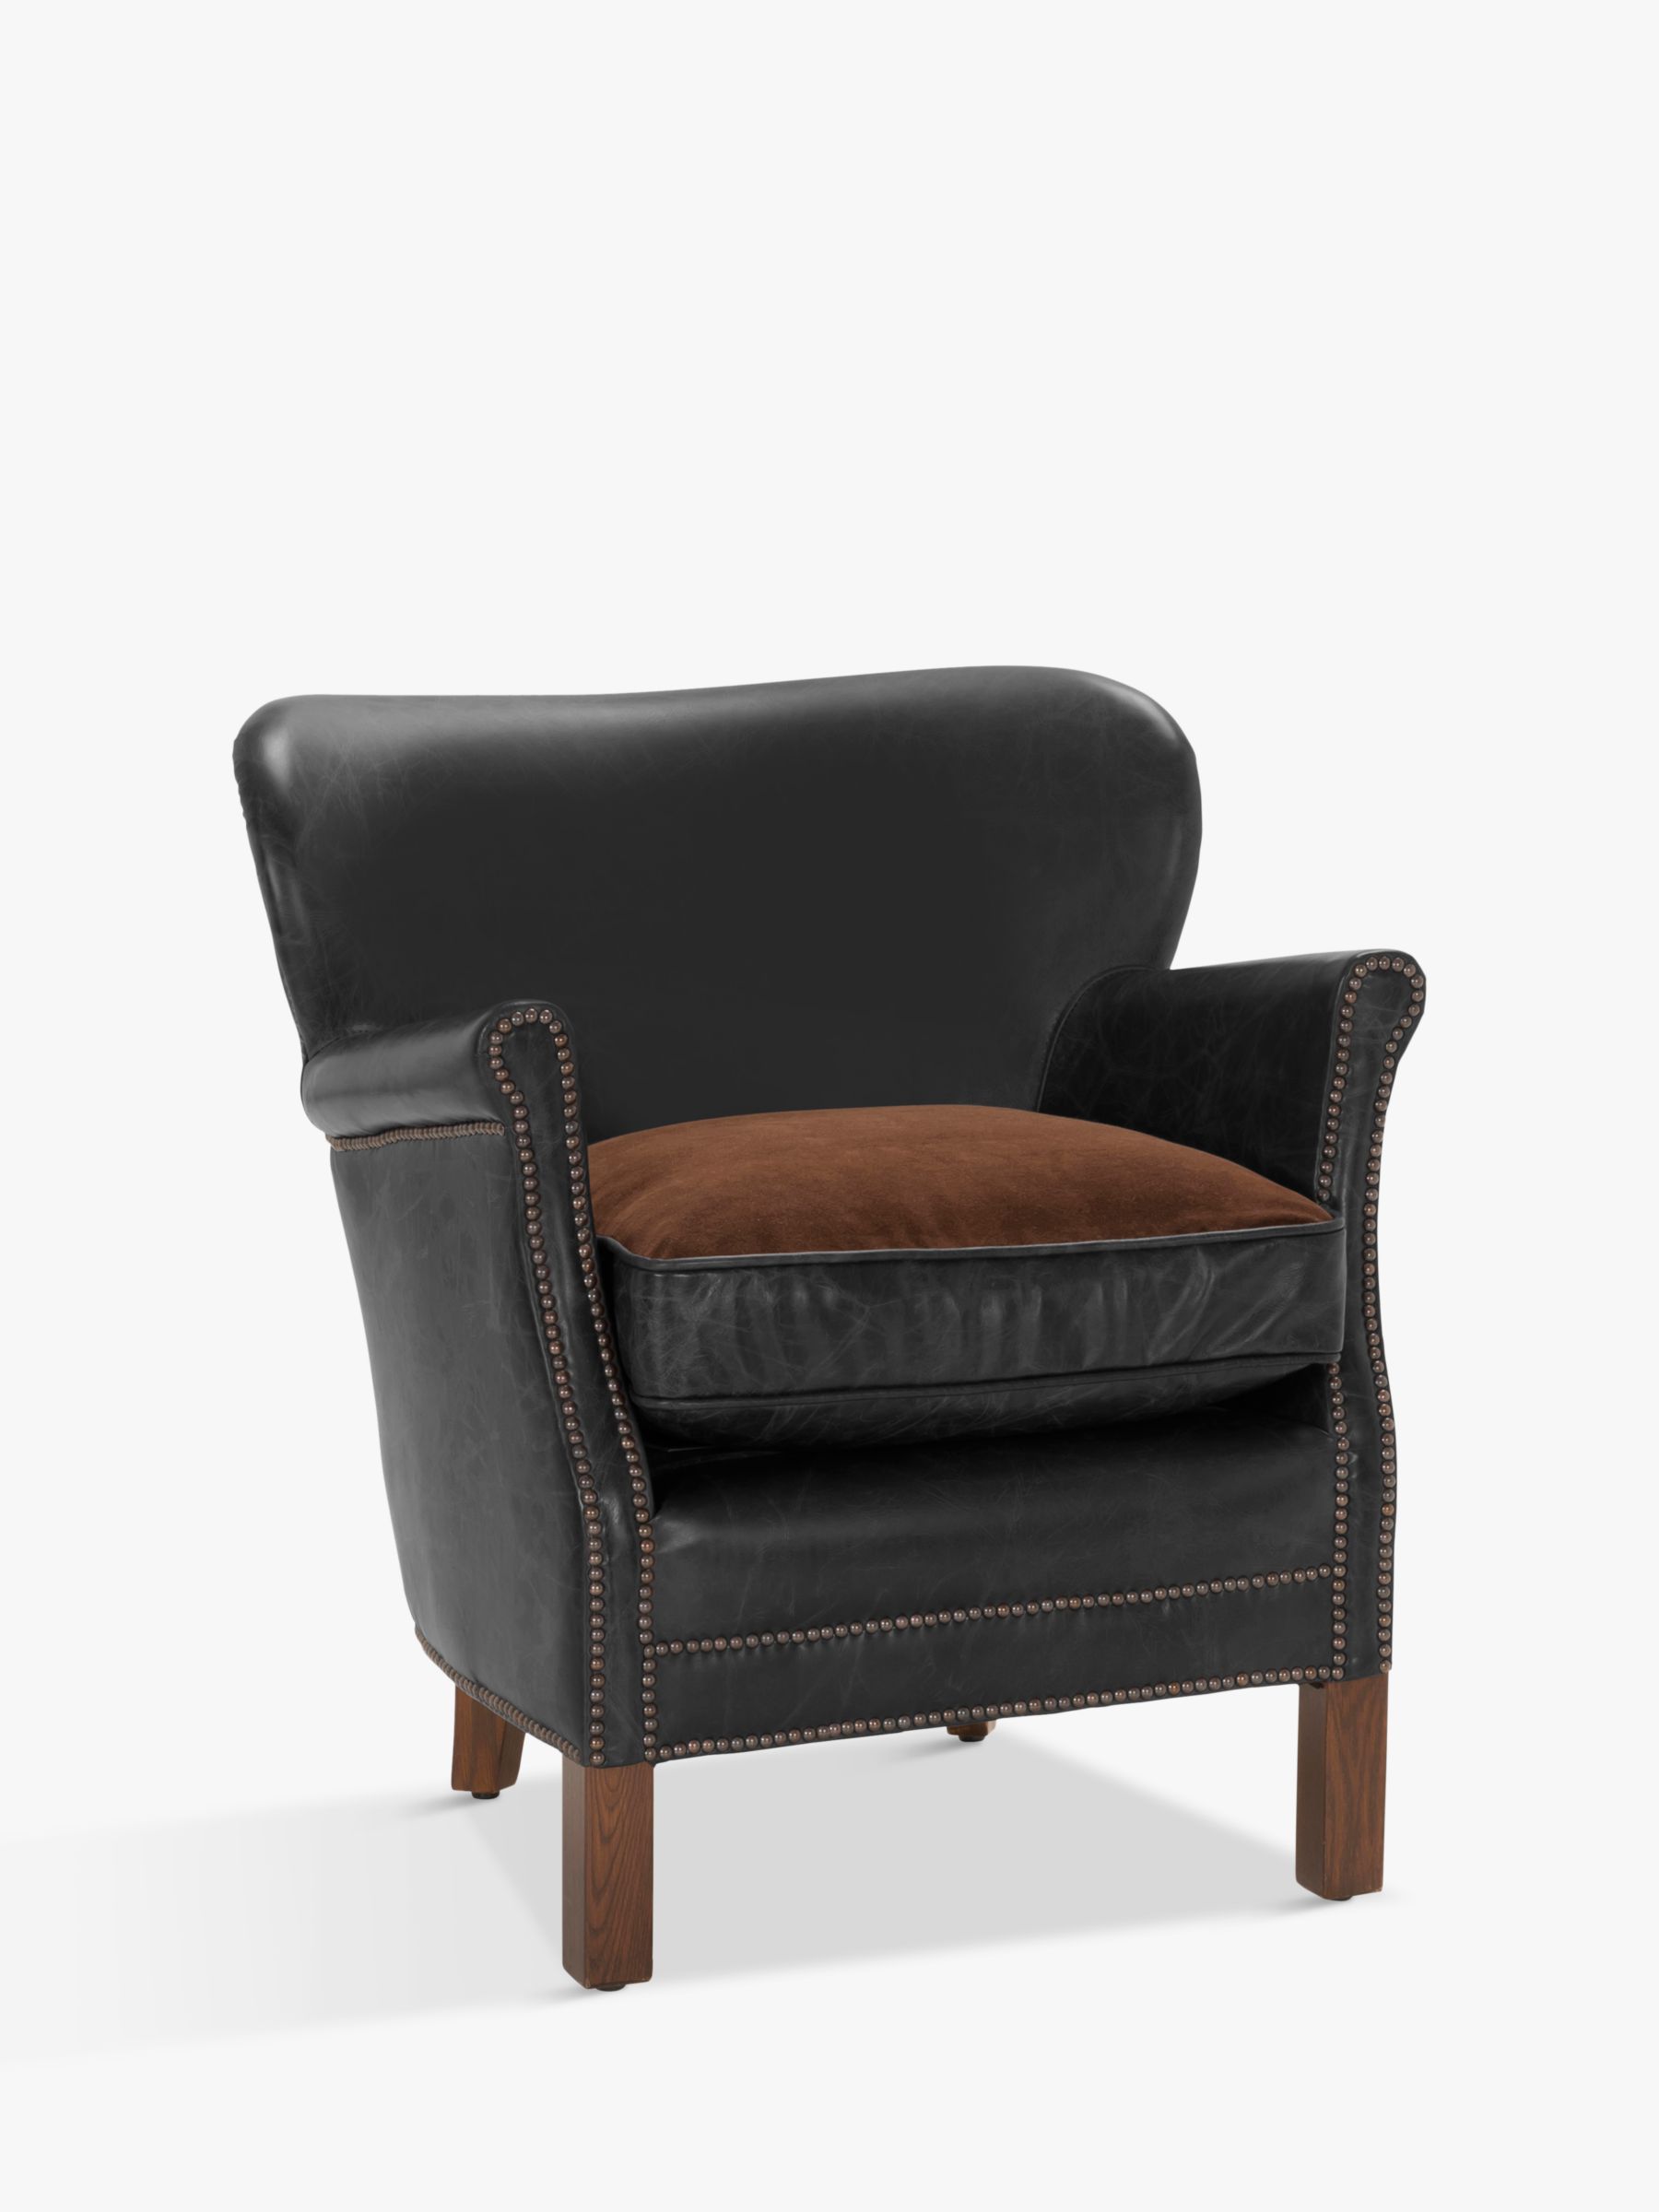 Halo Little Professor Aniline Leather Chair At John Lewis Partners